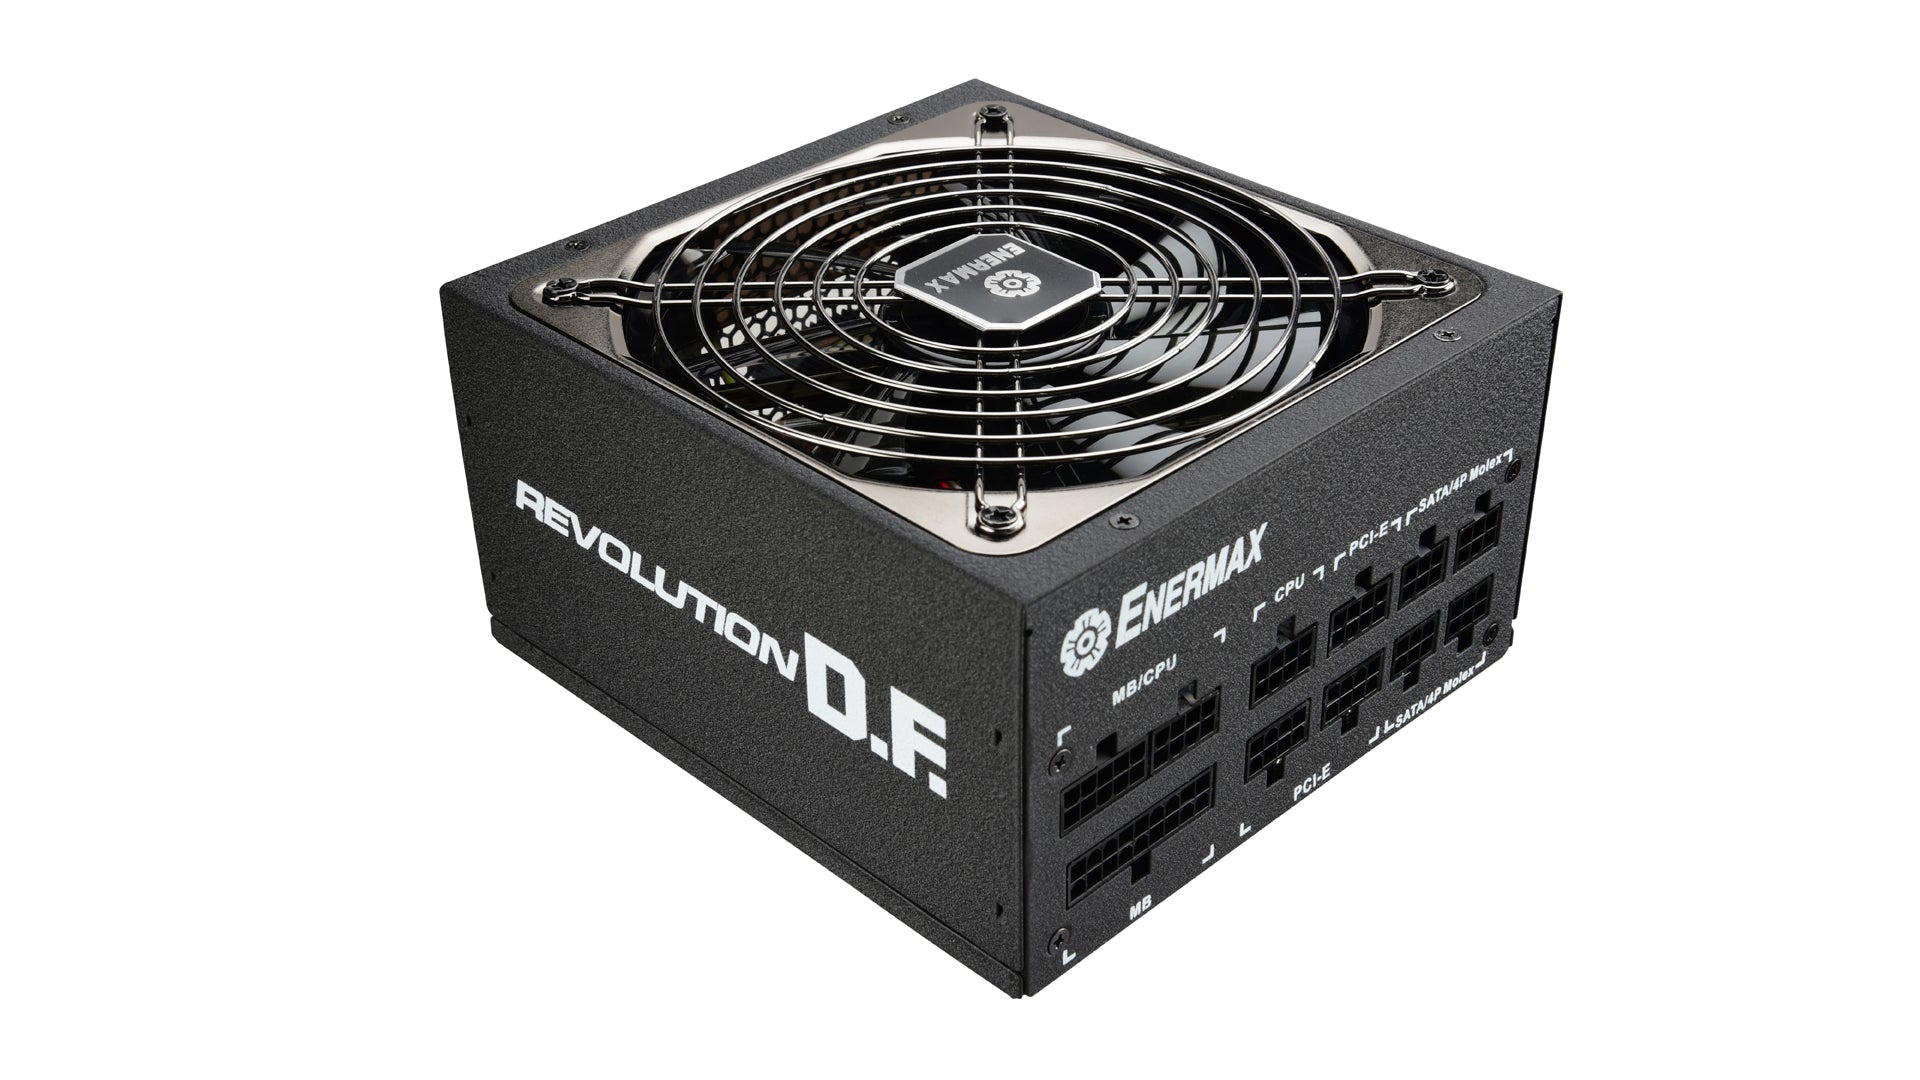 REVOLUTION D.F. 750W / 80 PLUS® Gold Certified Power Supply (Refurbished)